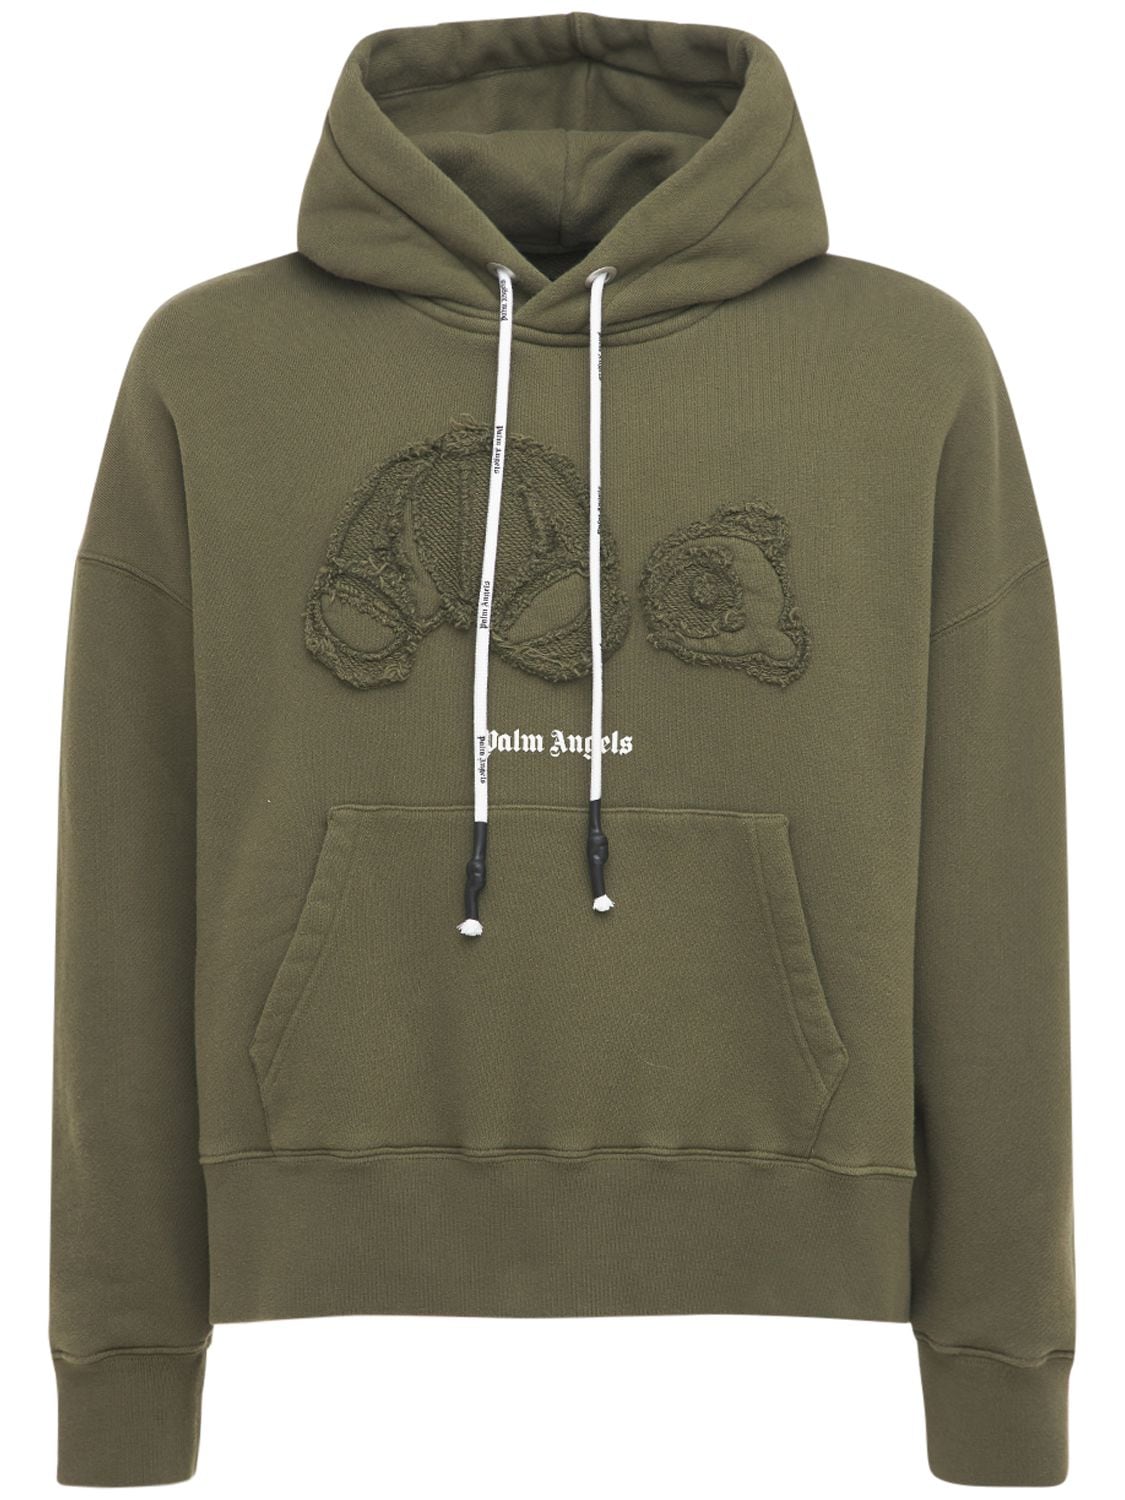 Palm Angels Clothing RAW CUT BEAR COTTON JERSEY HOODIE